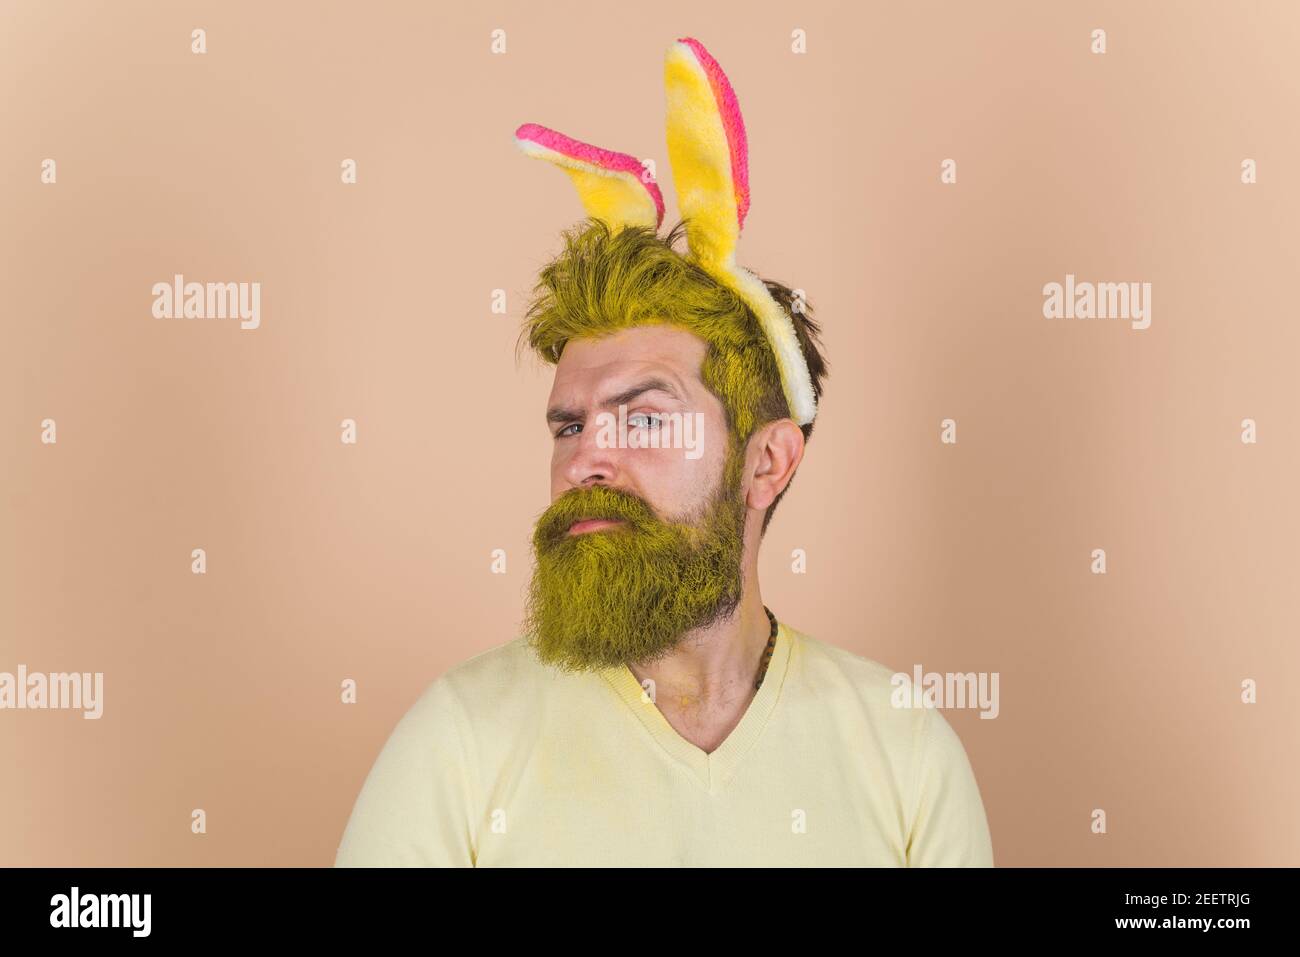 Easter man. Bearded male with bunny ears. Serious guy with yellow dyed hair and beard. Stock Photo